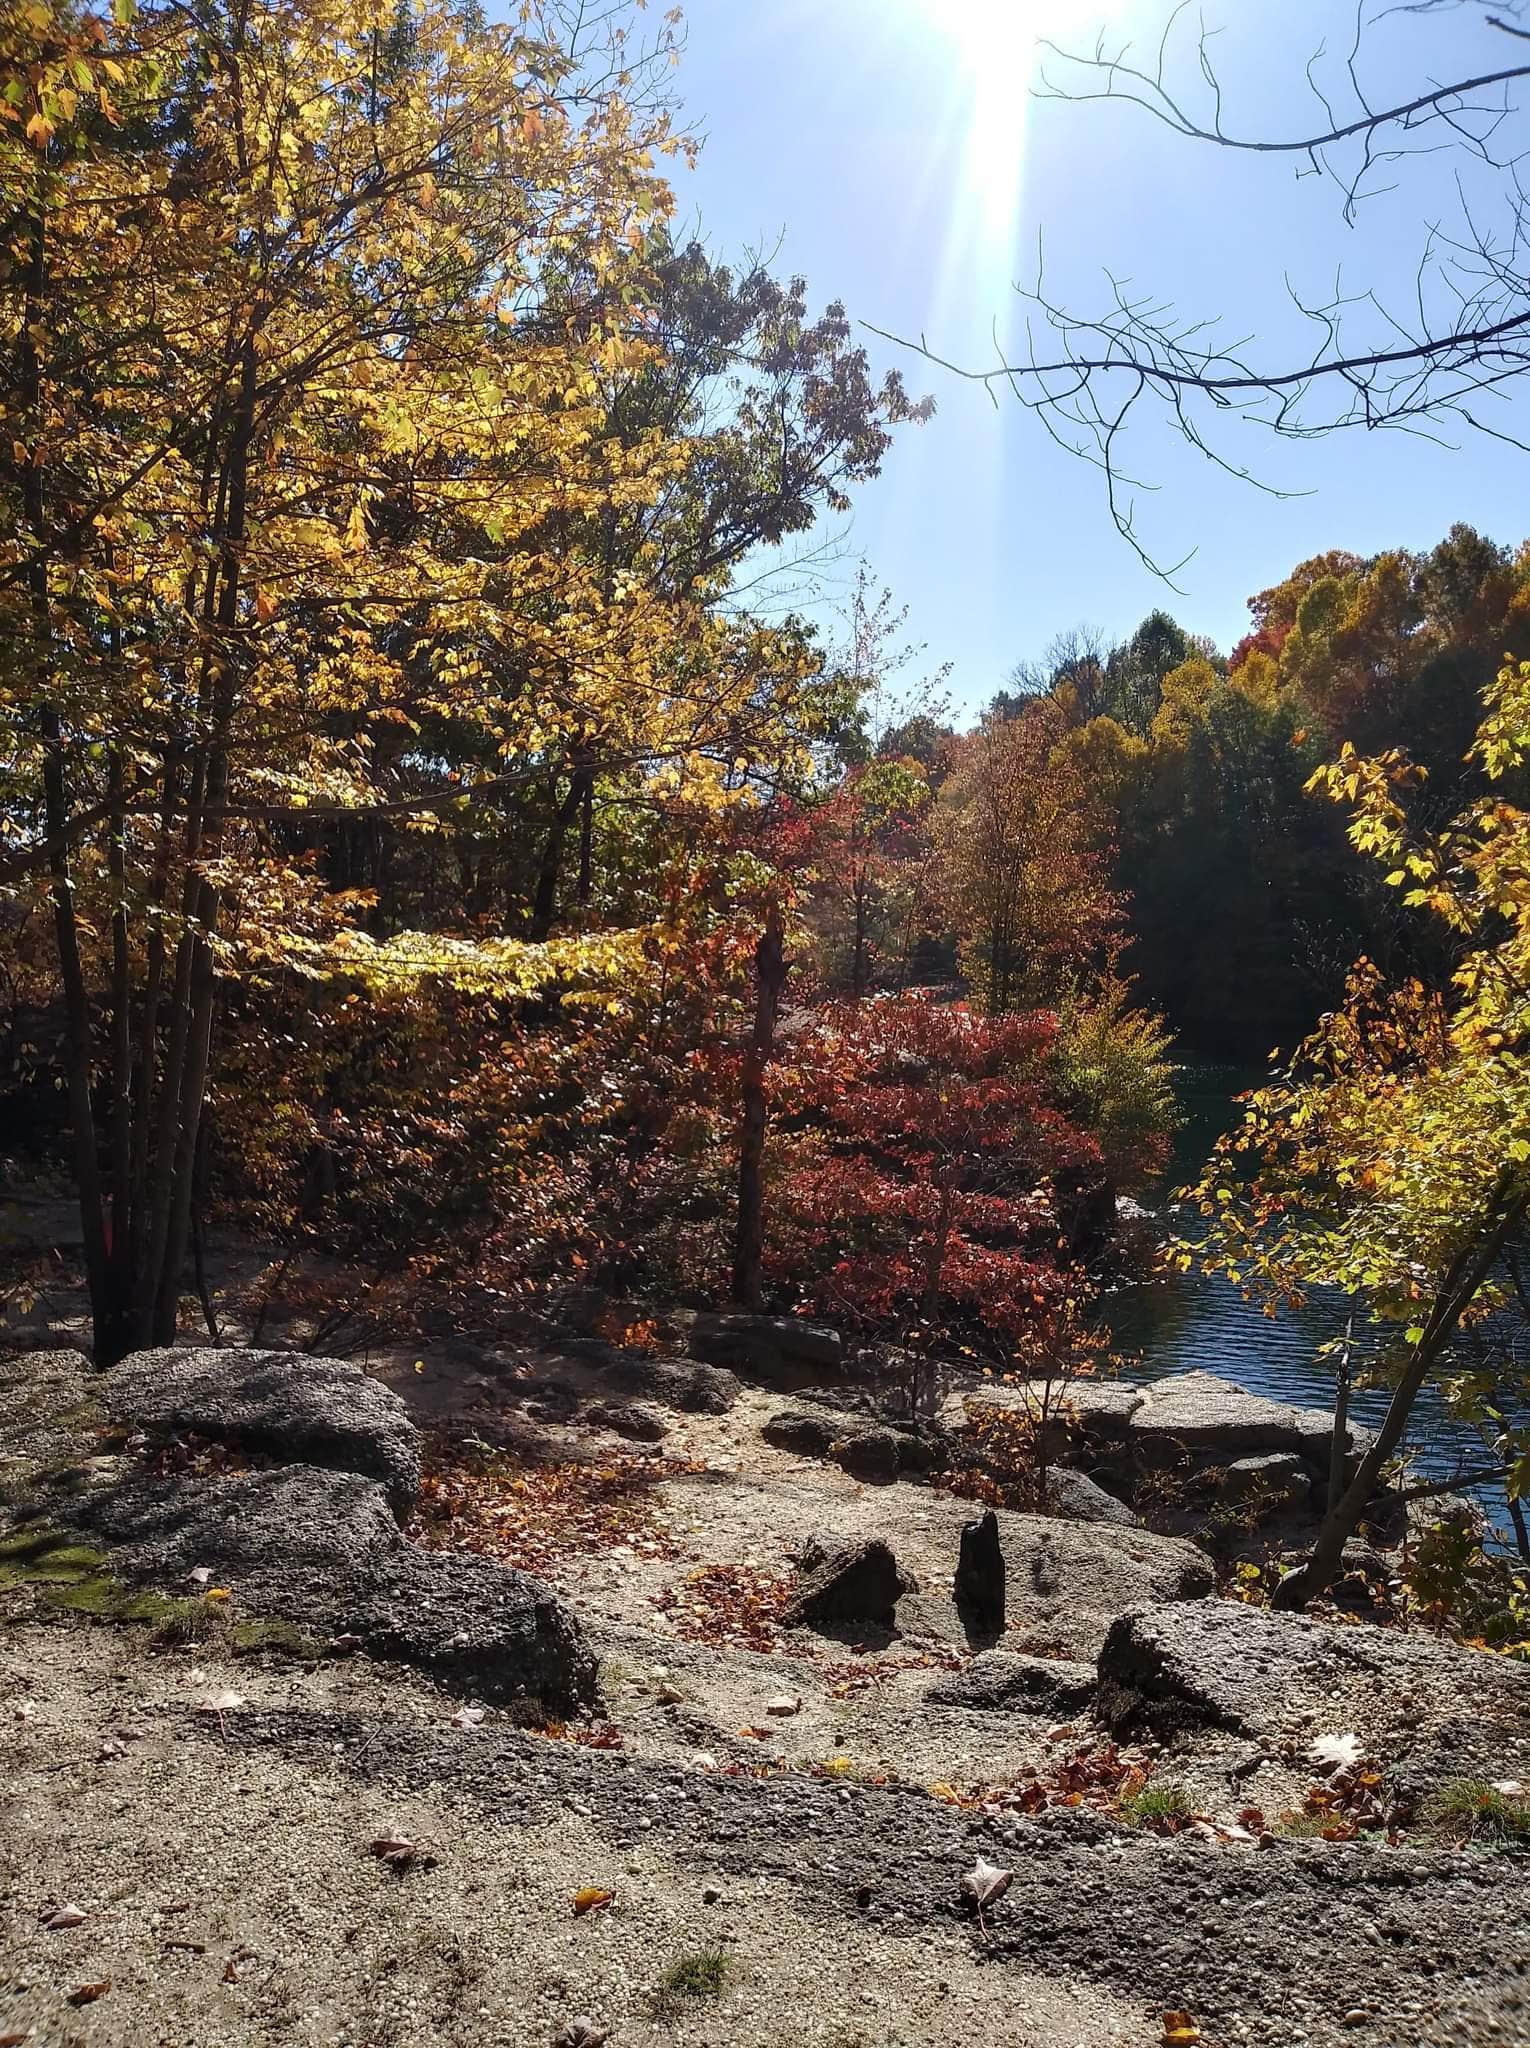 Camper submitted image from Nelson's Ledges Quarry Park - 5